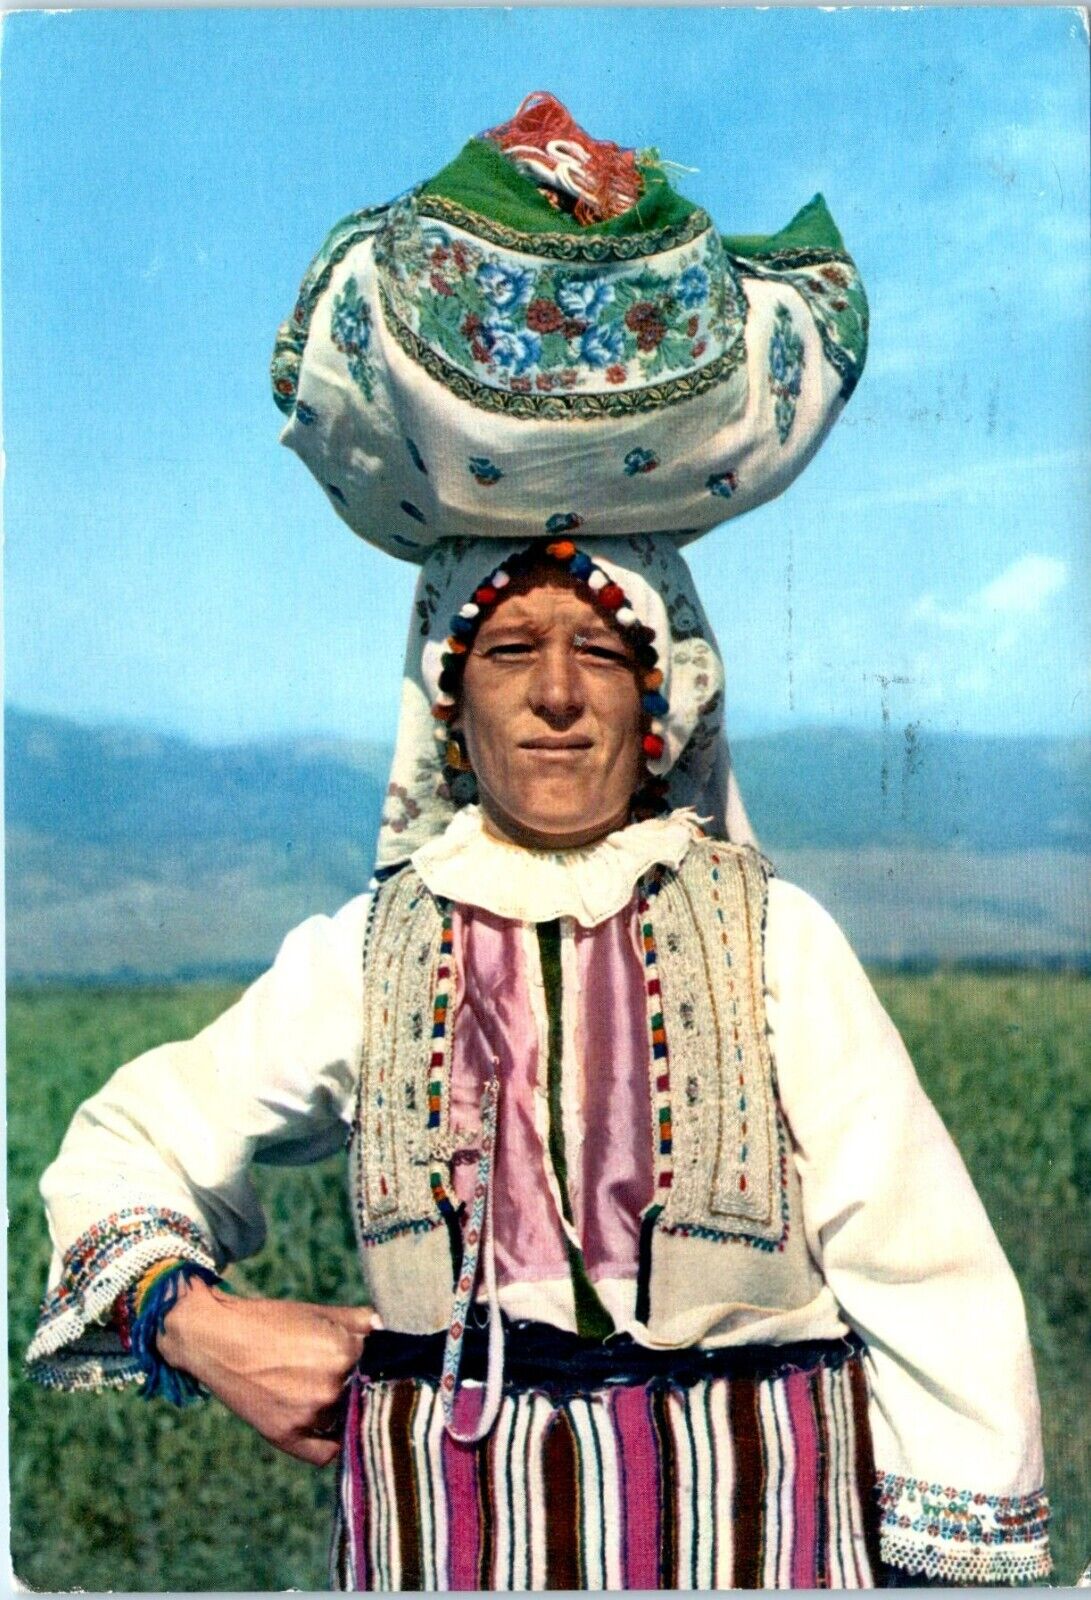 Picture of a Type of Peasant Belgrade, Yugoslavia  Postcard Postmarked 1960